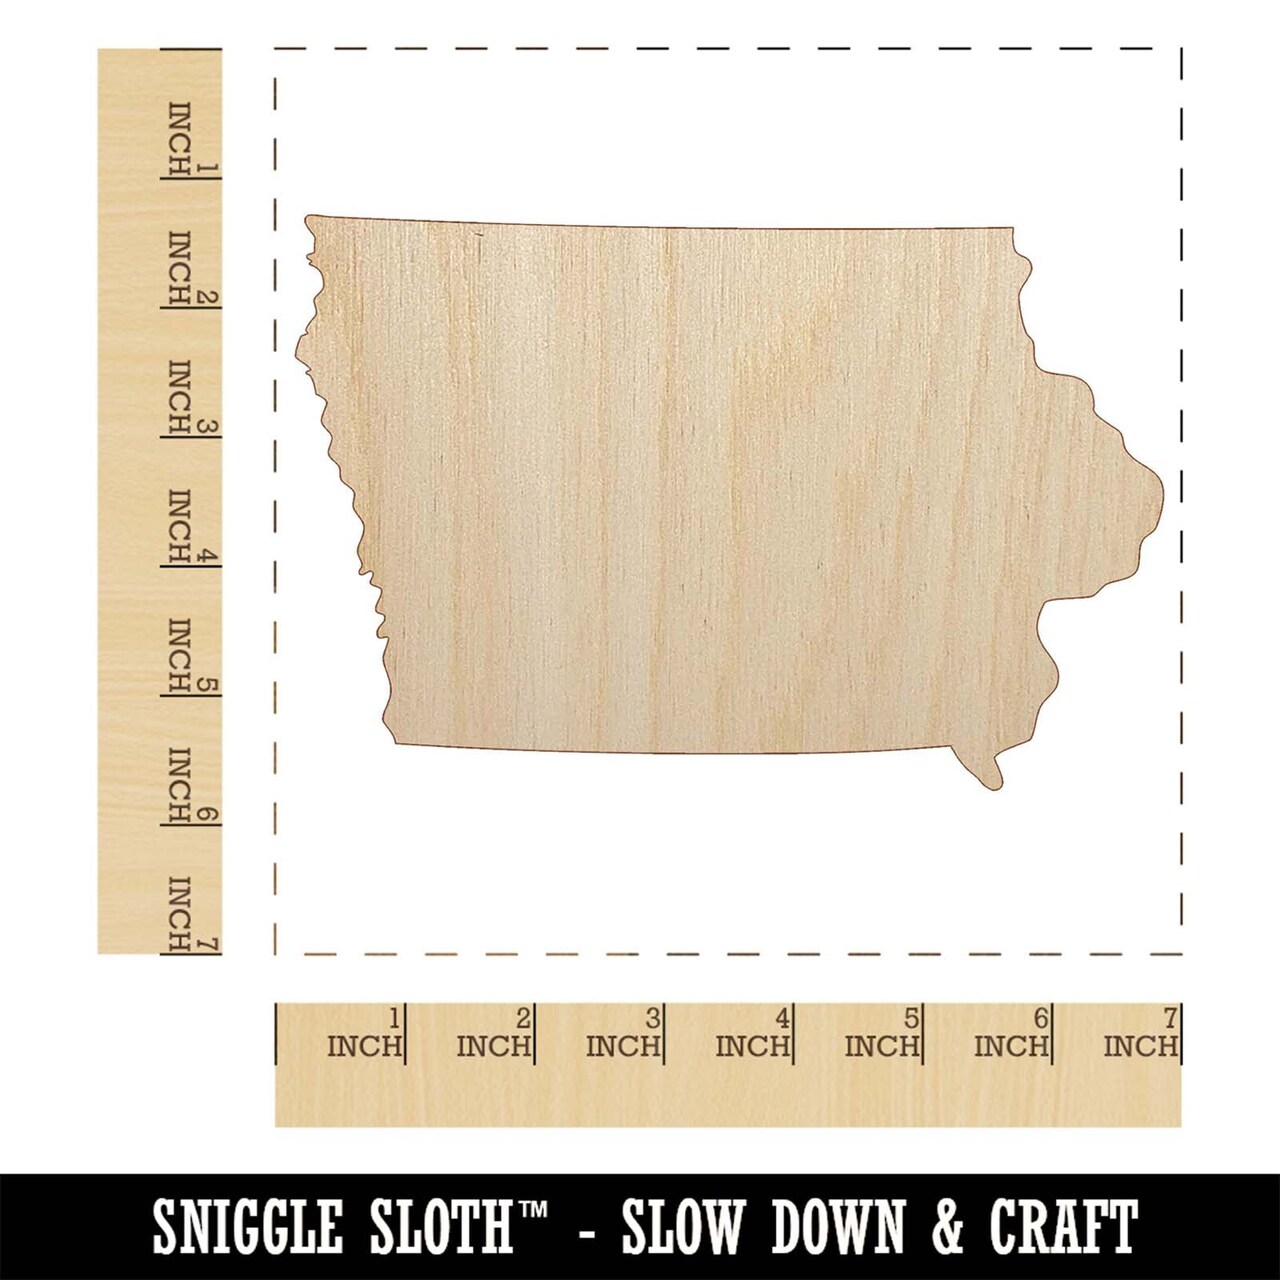 Iowa State Silhouette Unfinished Wood Shape Piece Cutout for DIY Craft Projects